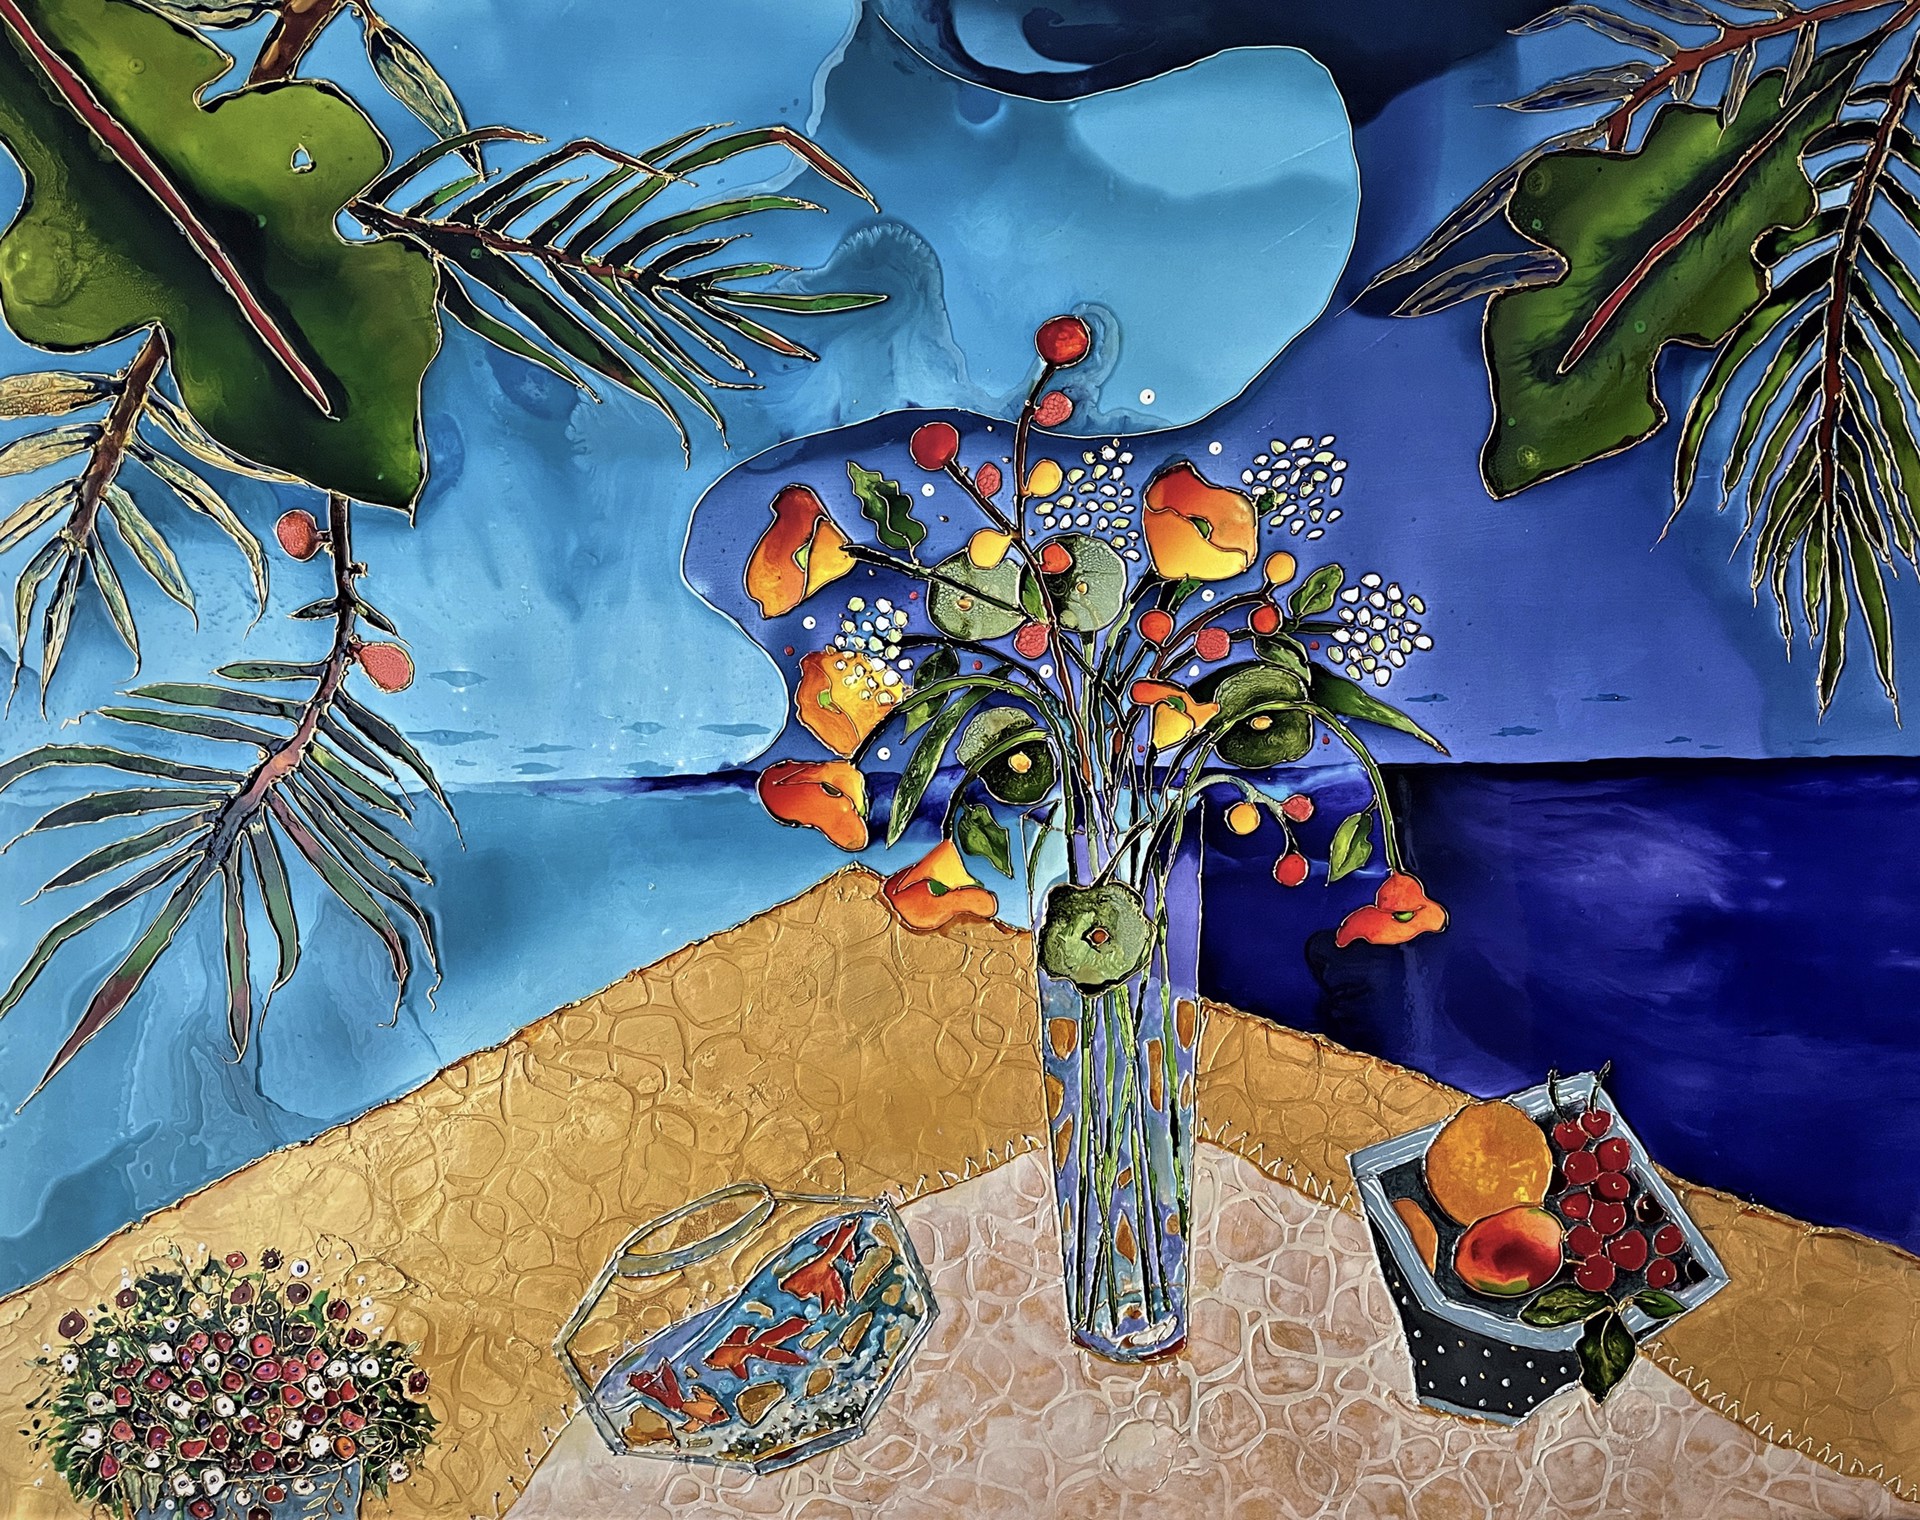 Mixed media on panel floral still life painting Twilight on the Terrace by Genie Appel-Cohen